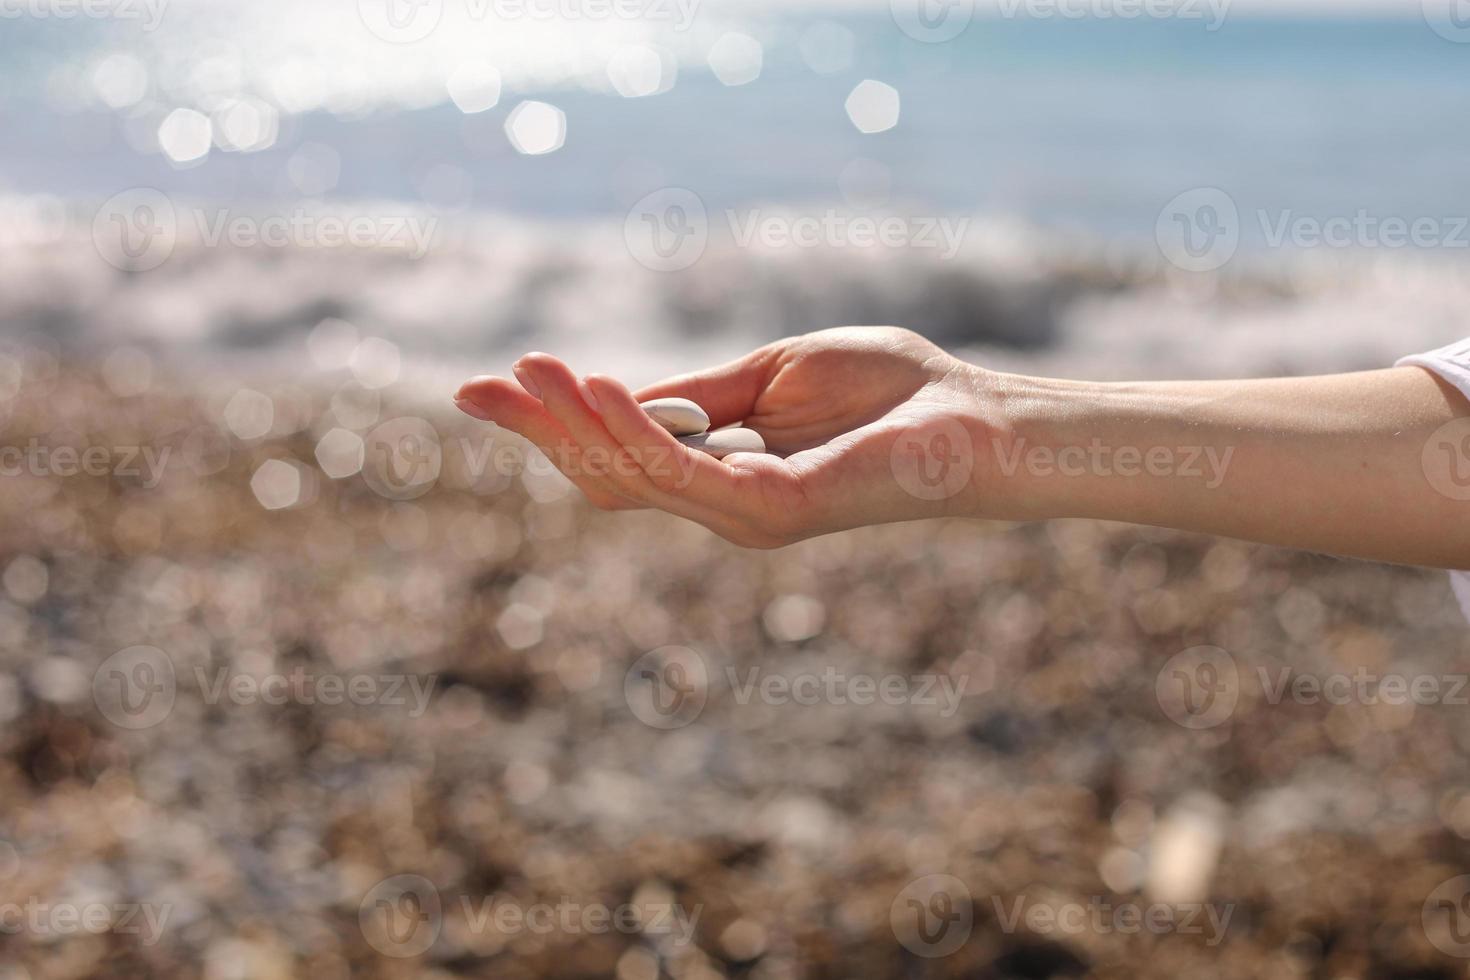 female hand holding small pebble stones in hand near blue sea on a beach background, picking up pebbles on the stone beach, round shape pebbles, summer vacation souvenir, beach day, selective focus photo